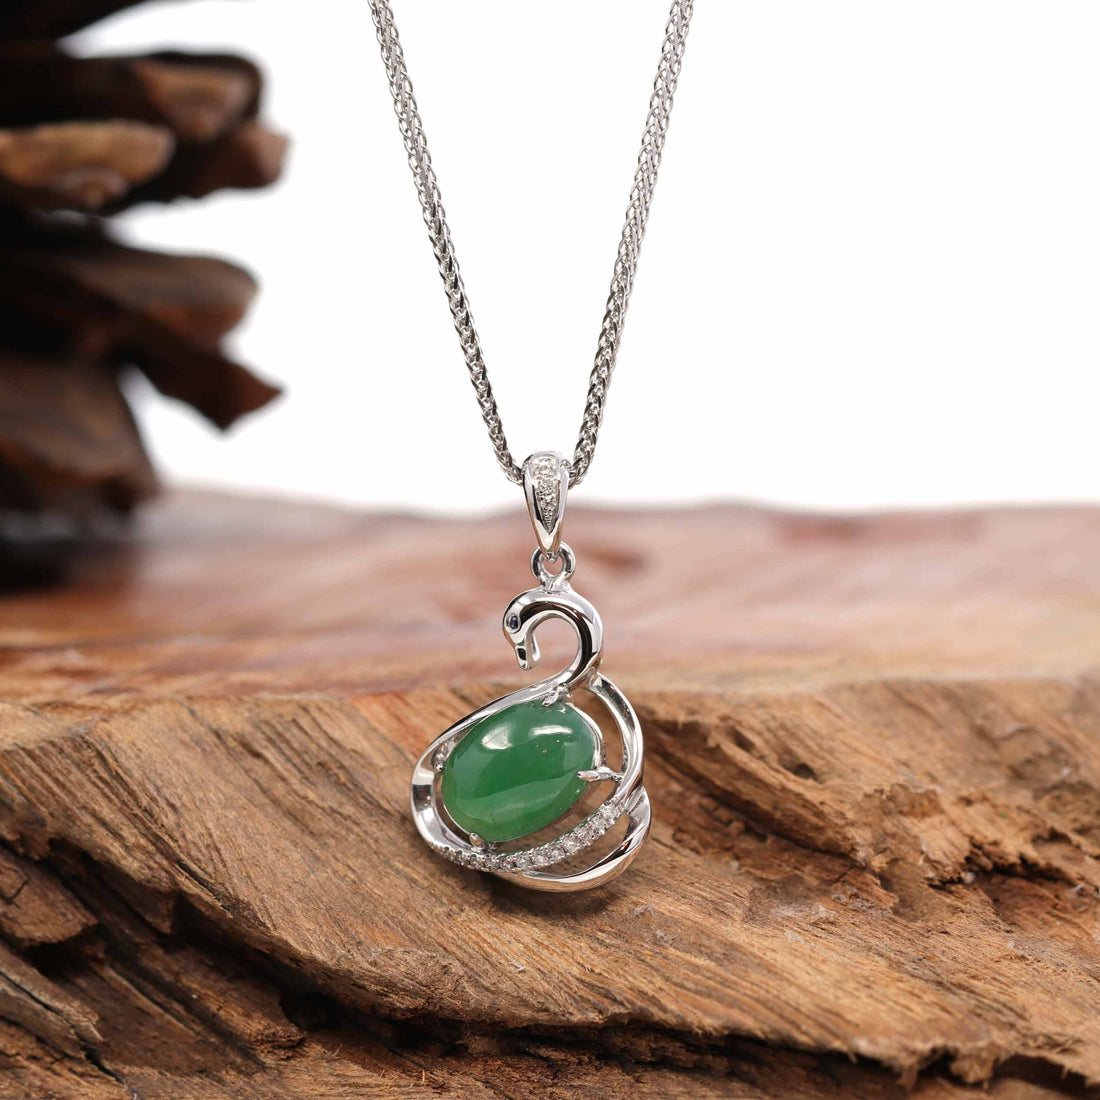 Baikalla Jewelry 18k Gold Jadeite Necklace Pendant Only 18K White Gold "Swan" Imperial Jadeite Jade Cabochon Necklace with Diamonds